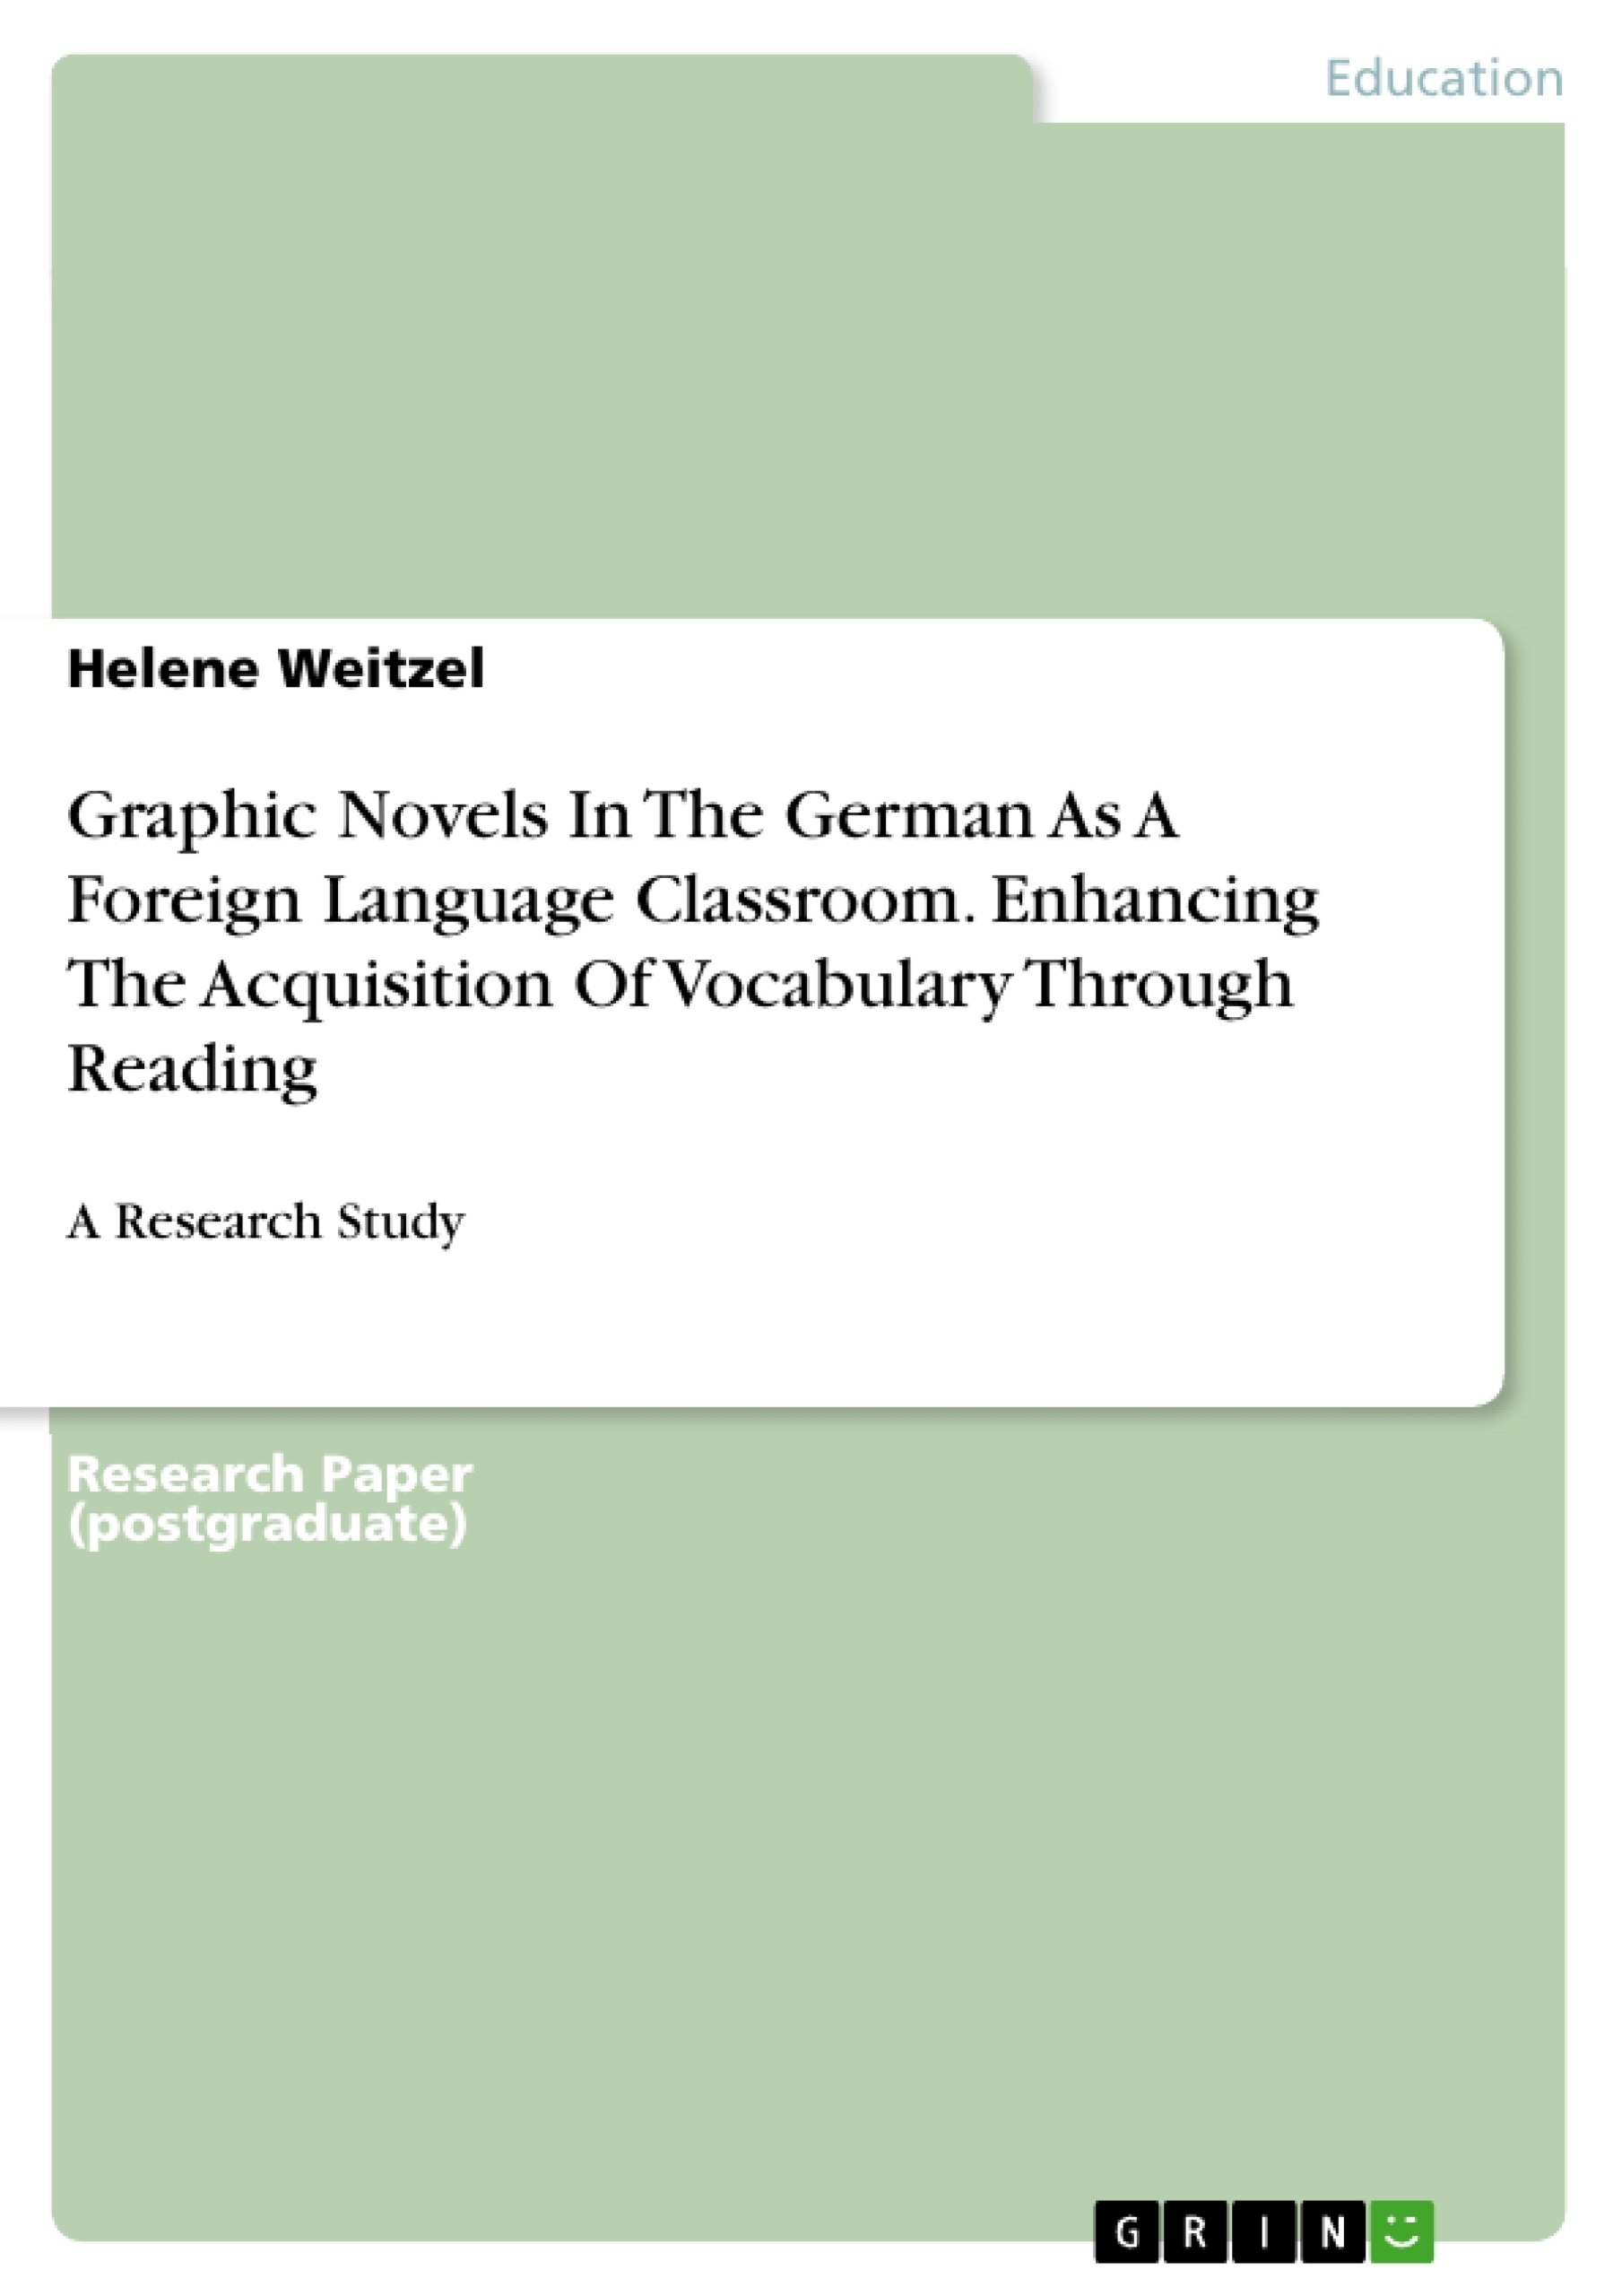 Title: Graphic Novels In The German As A Foreign Language Classroom. Enhancing The Acquisition Of Vocabulary Through Reading